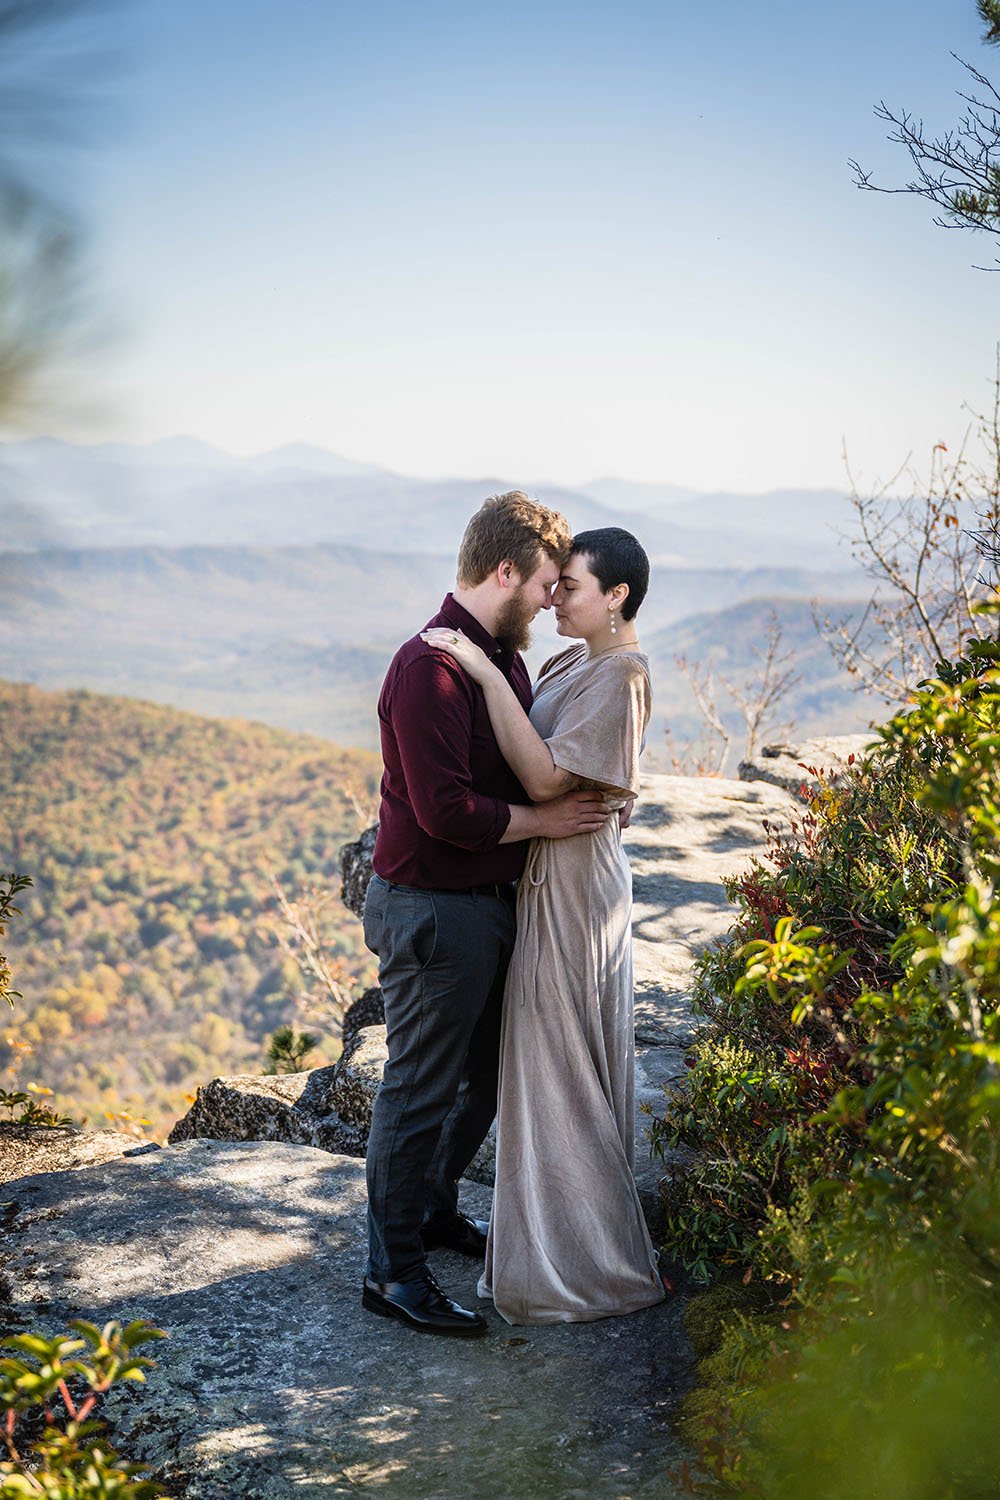 A couple embraces at the summit of McAfee Knob with the Blue Ridge Mountains in the background during their engagement photoshoot.